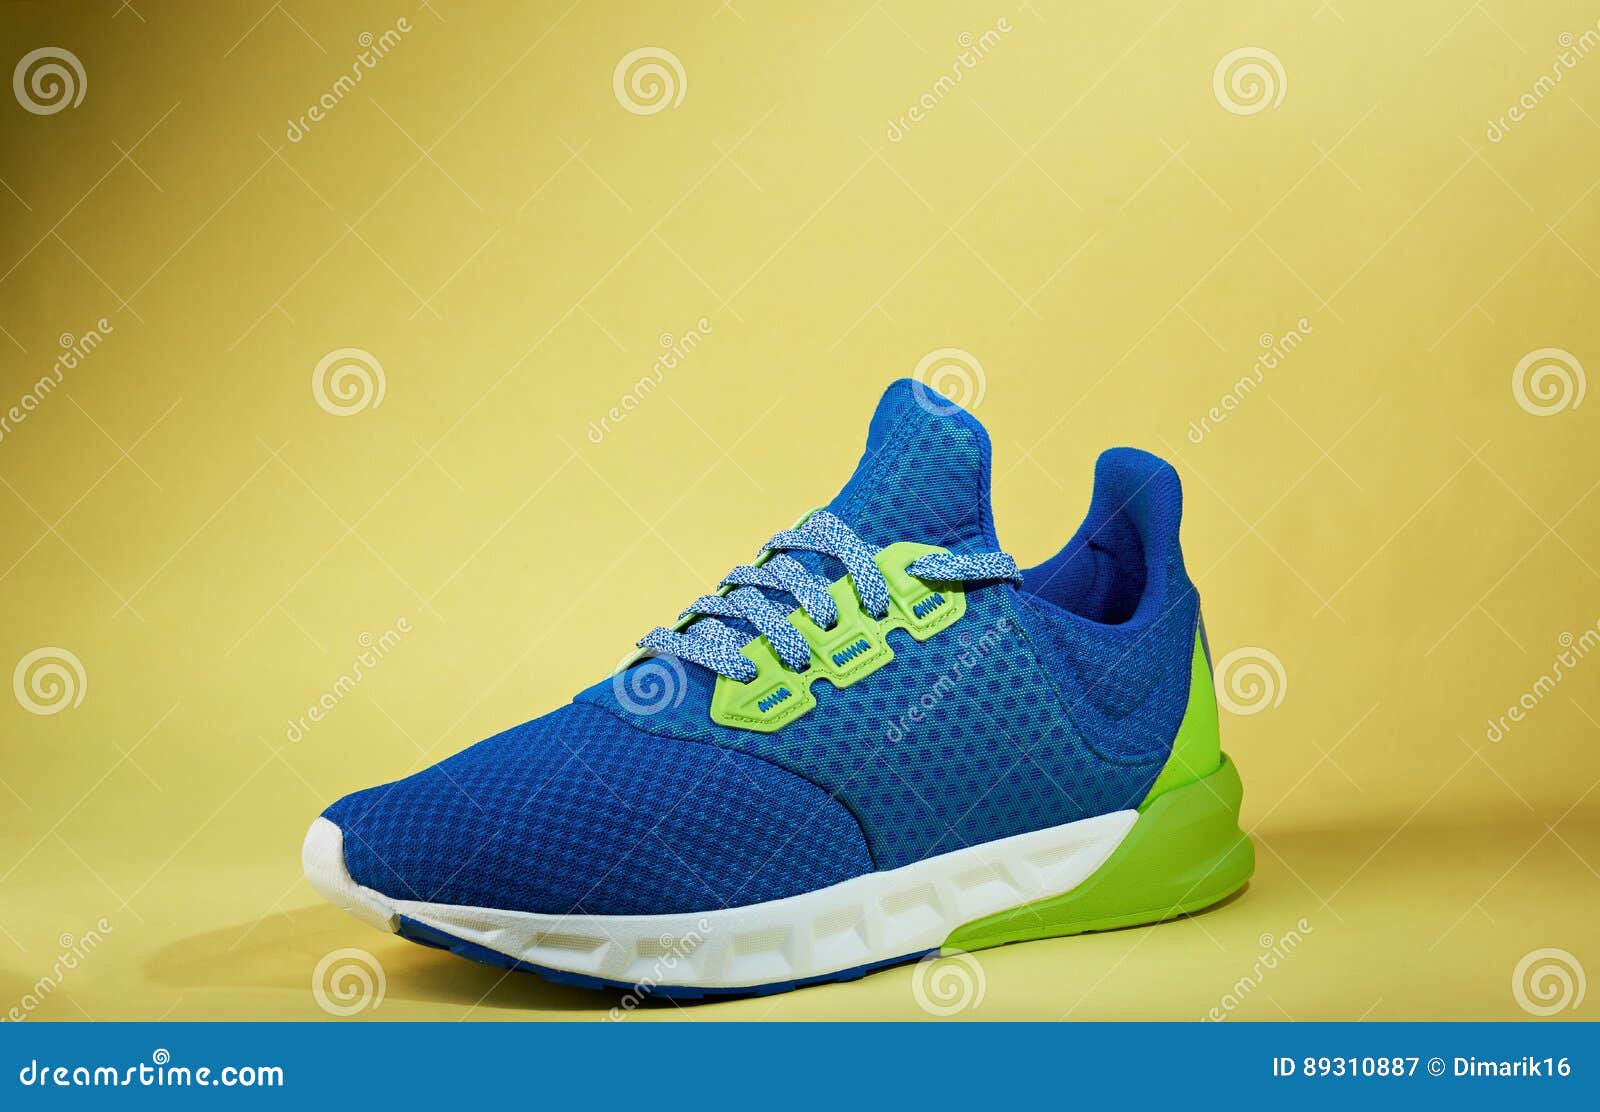 New modern trainer shoe stock image. Image of male, pattern - 89310887